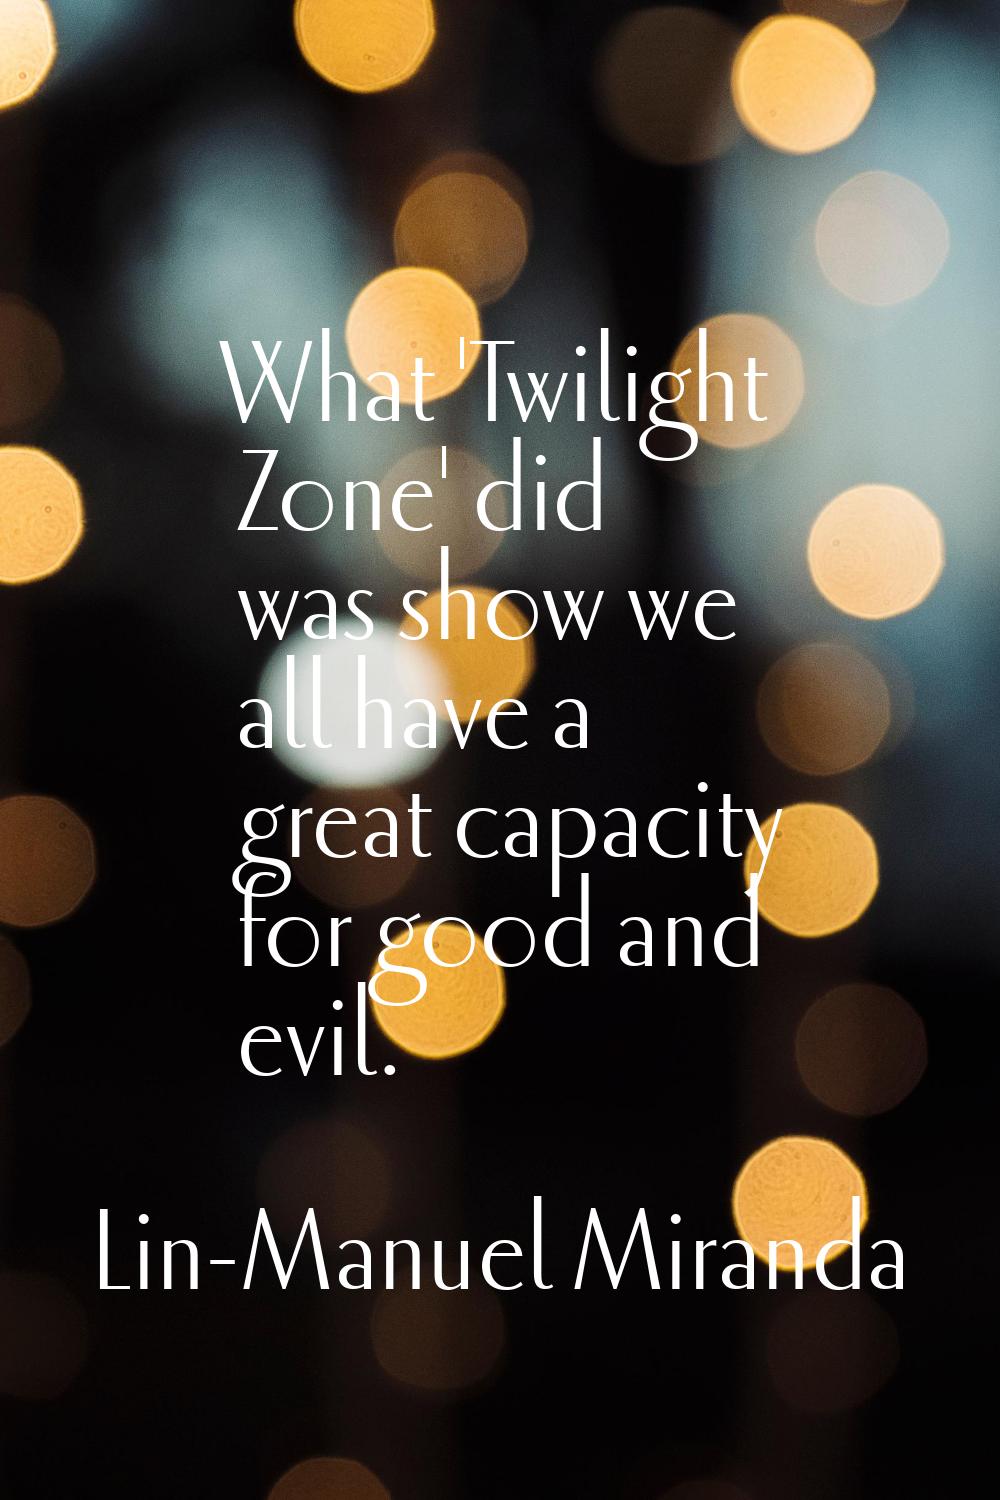 What 'Twilight Zone' did was show we all have a great capacity for good and evil.